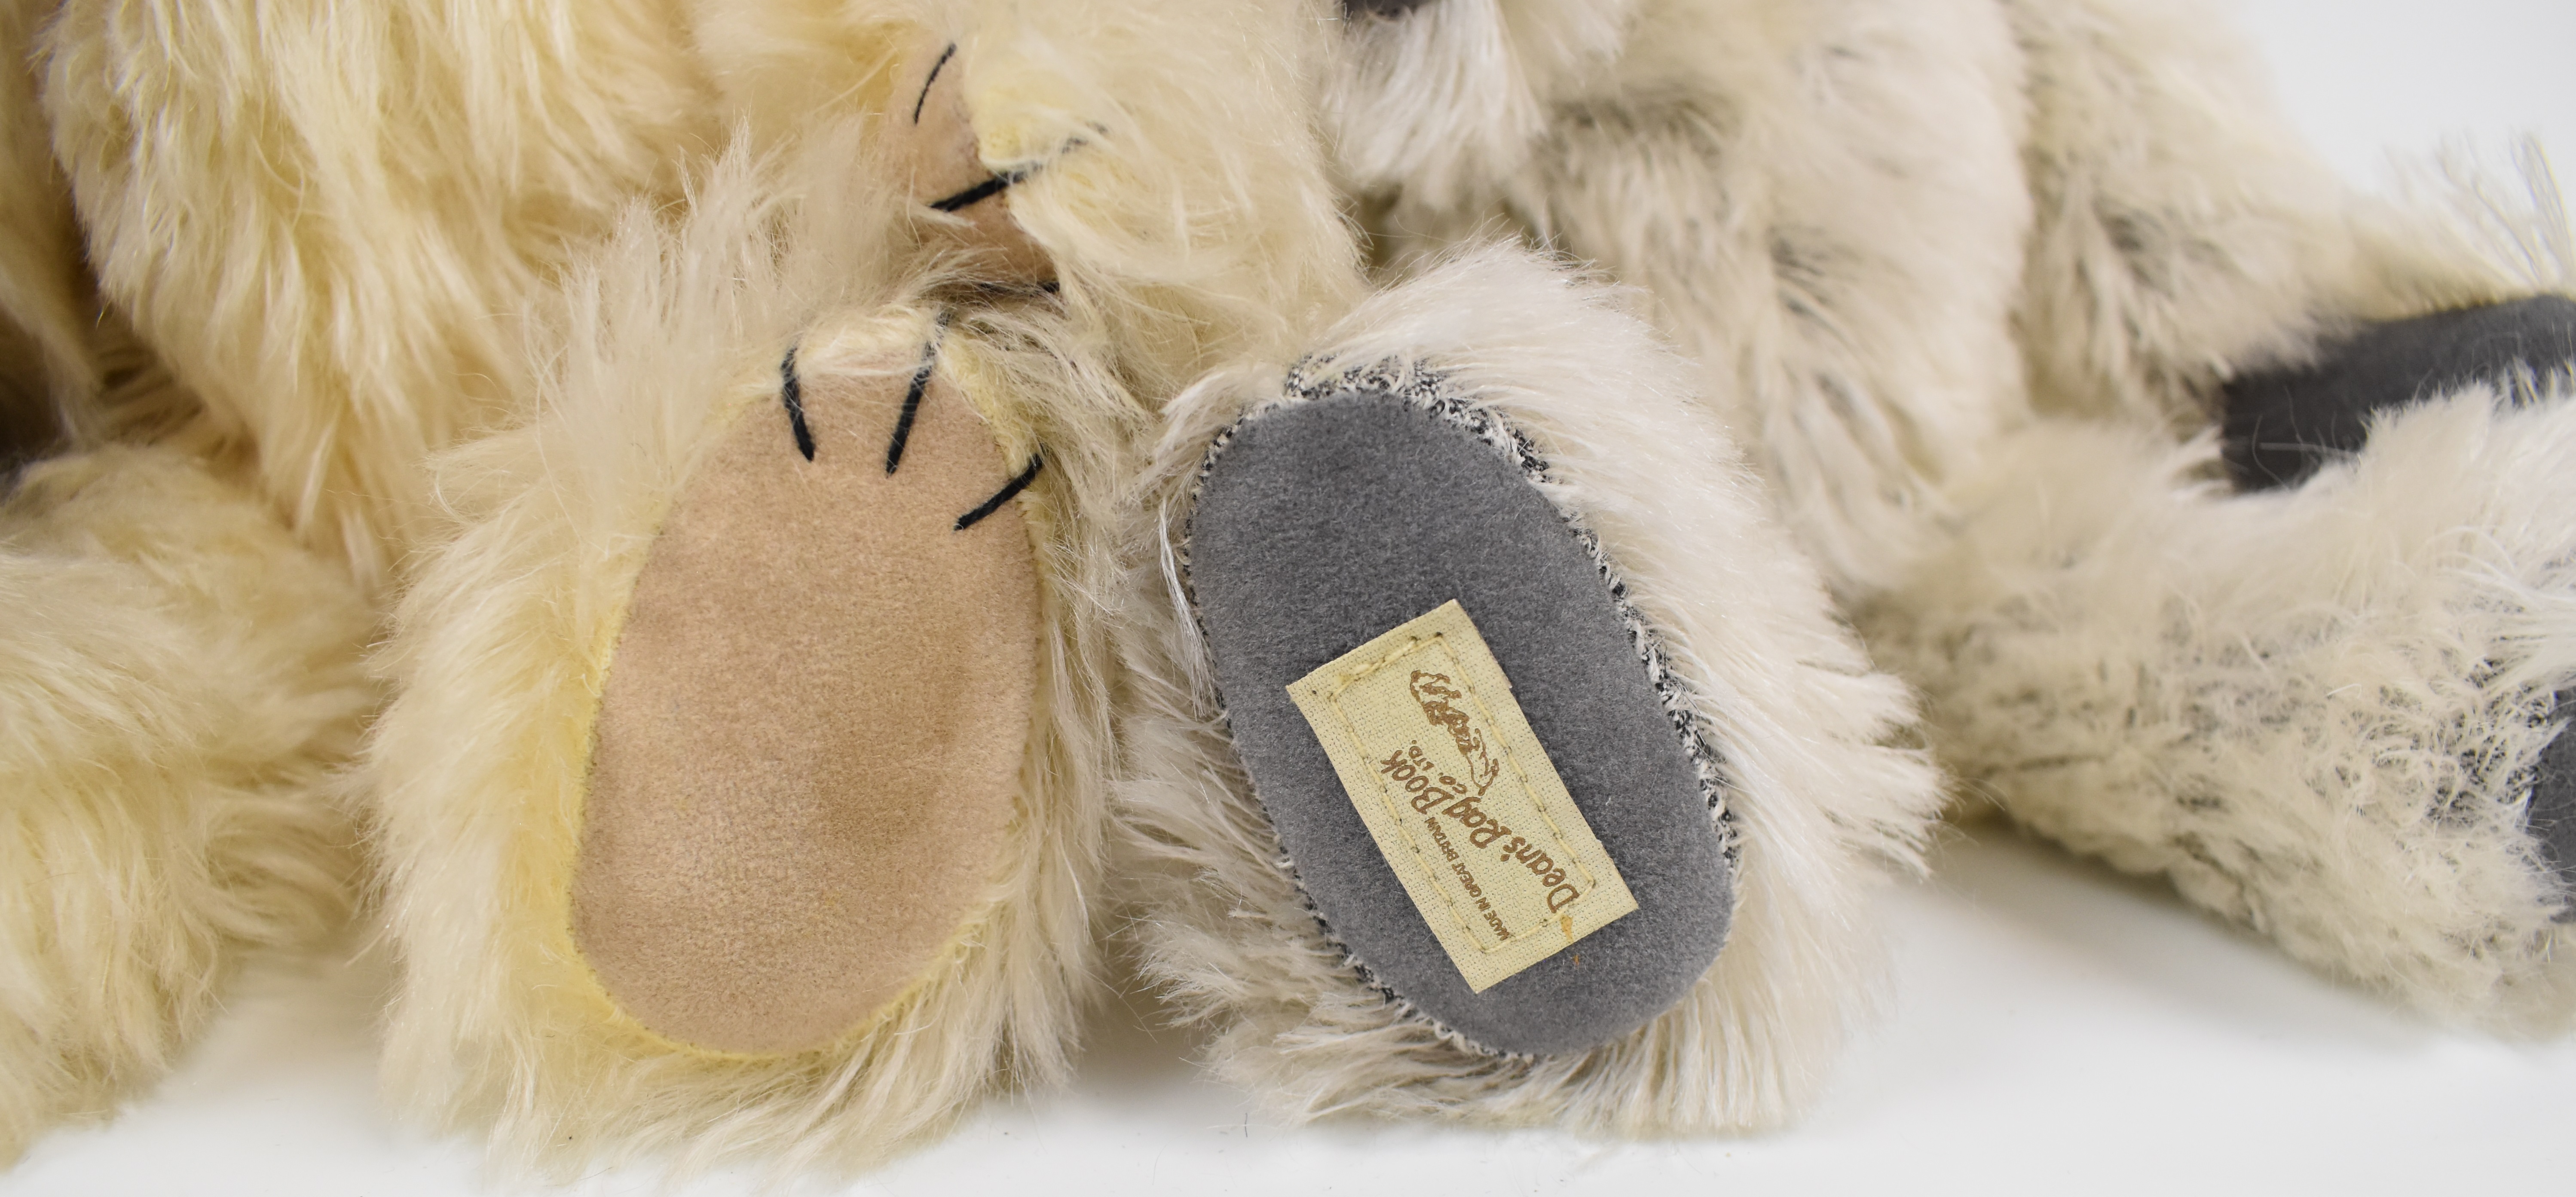 Thirteen Deans Rag Book limited edition Teddy bears, most with original tags and labels to include - Image 4 of 12